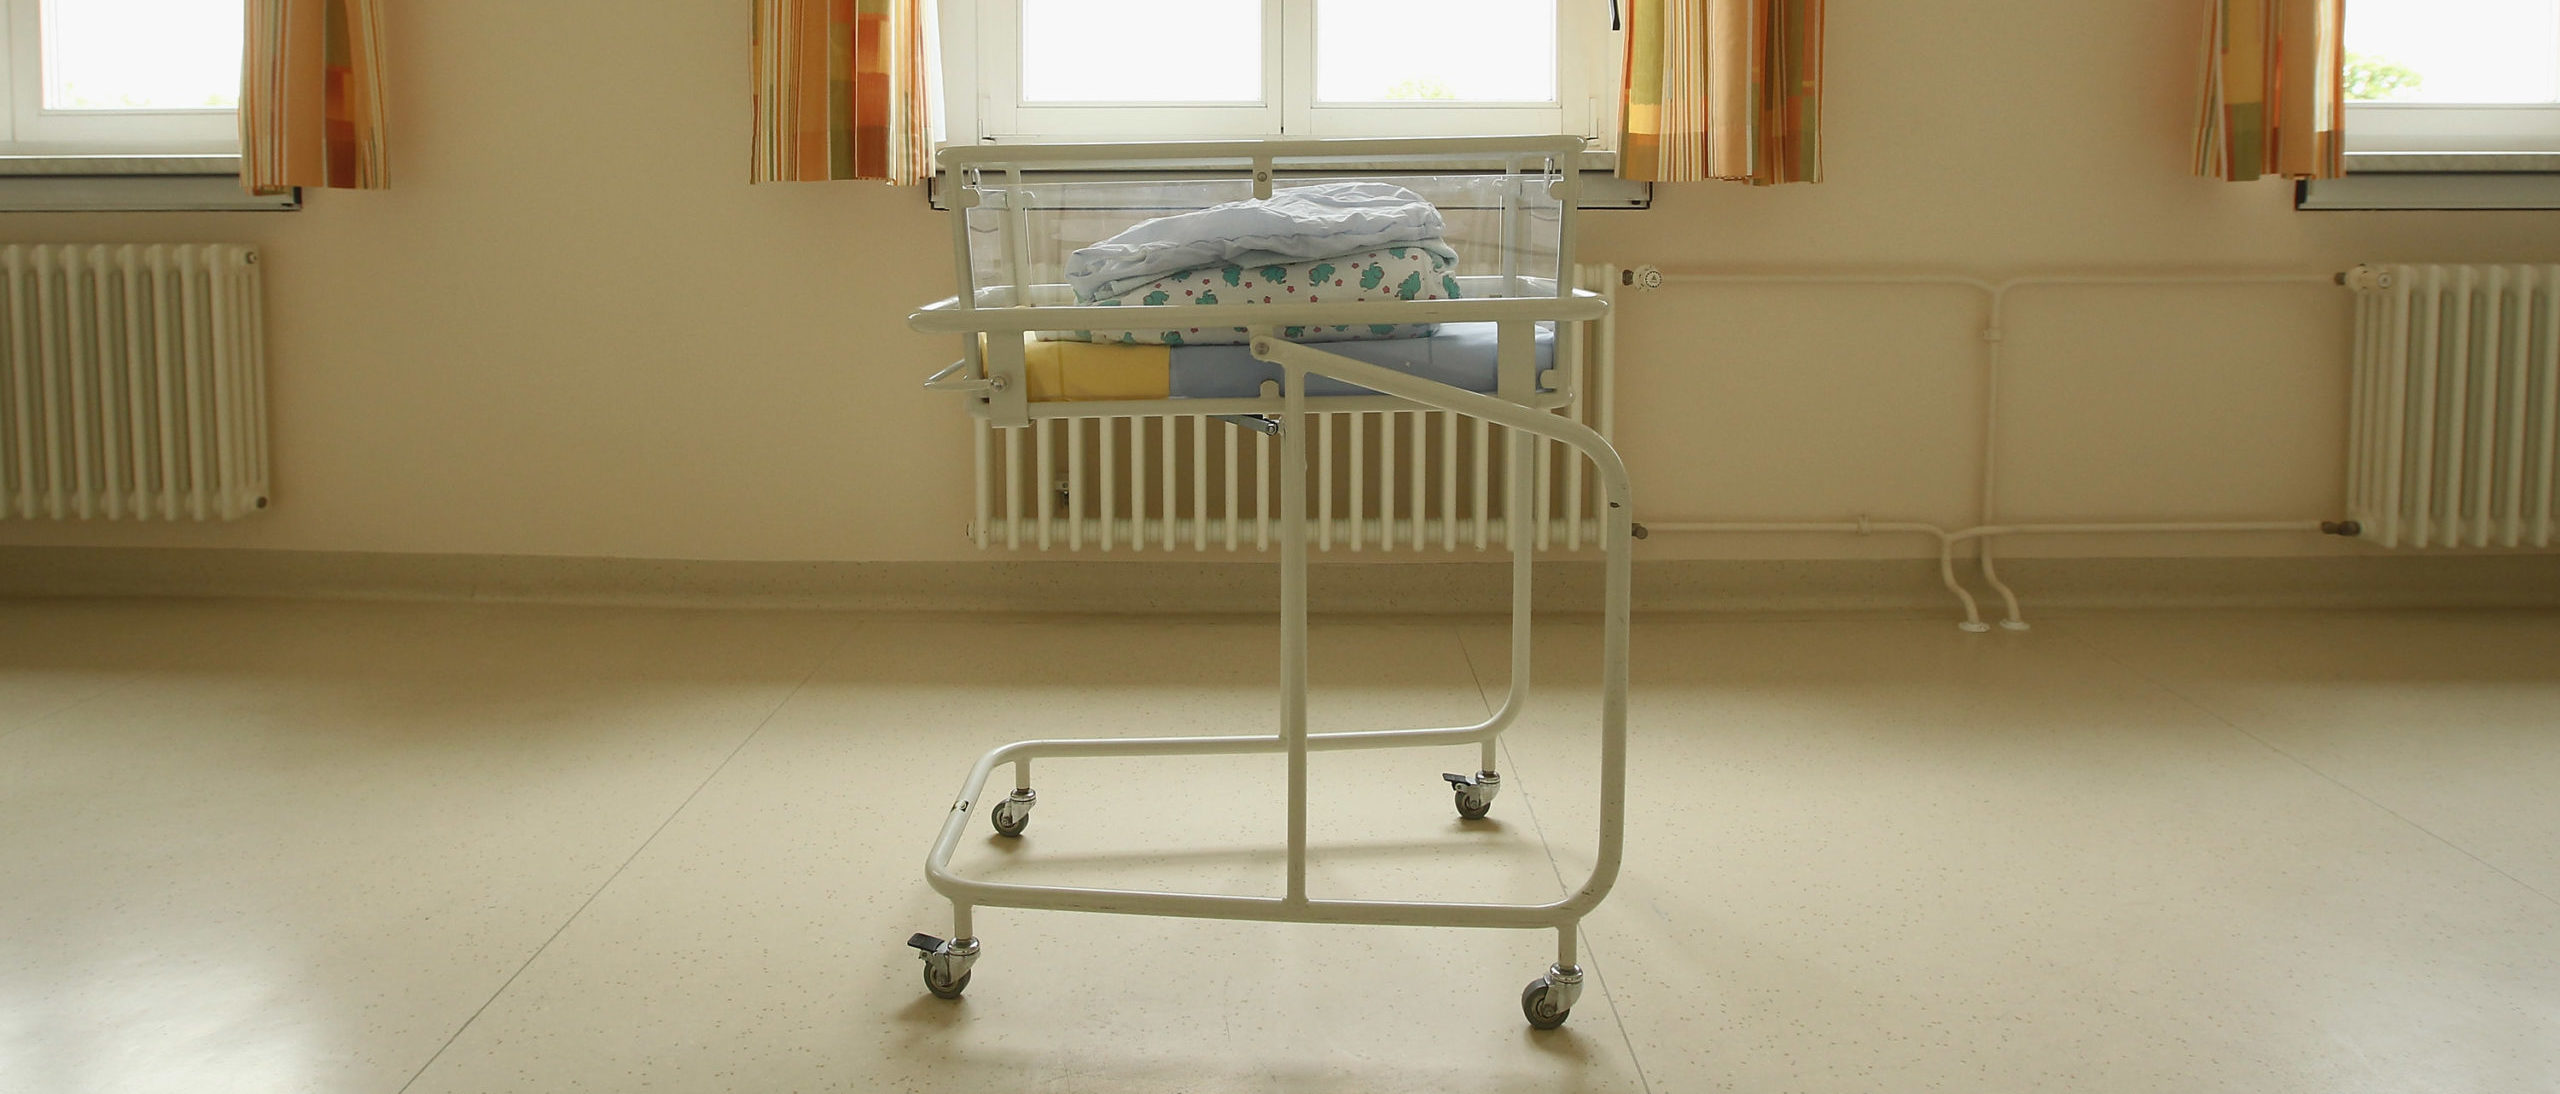 UNDISCLOSED, GERMANY - AUGUST 12: An empty baby bed, which has been placed under a window by the photographer, stands in the maternity ward of a hospital (a spokesperson for the hospital asked that the hospital not be named) on August 12, 2011 in a city in the east German state of Brandenburg, Germany.